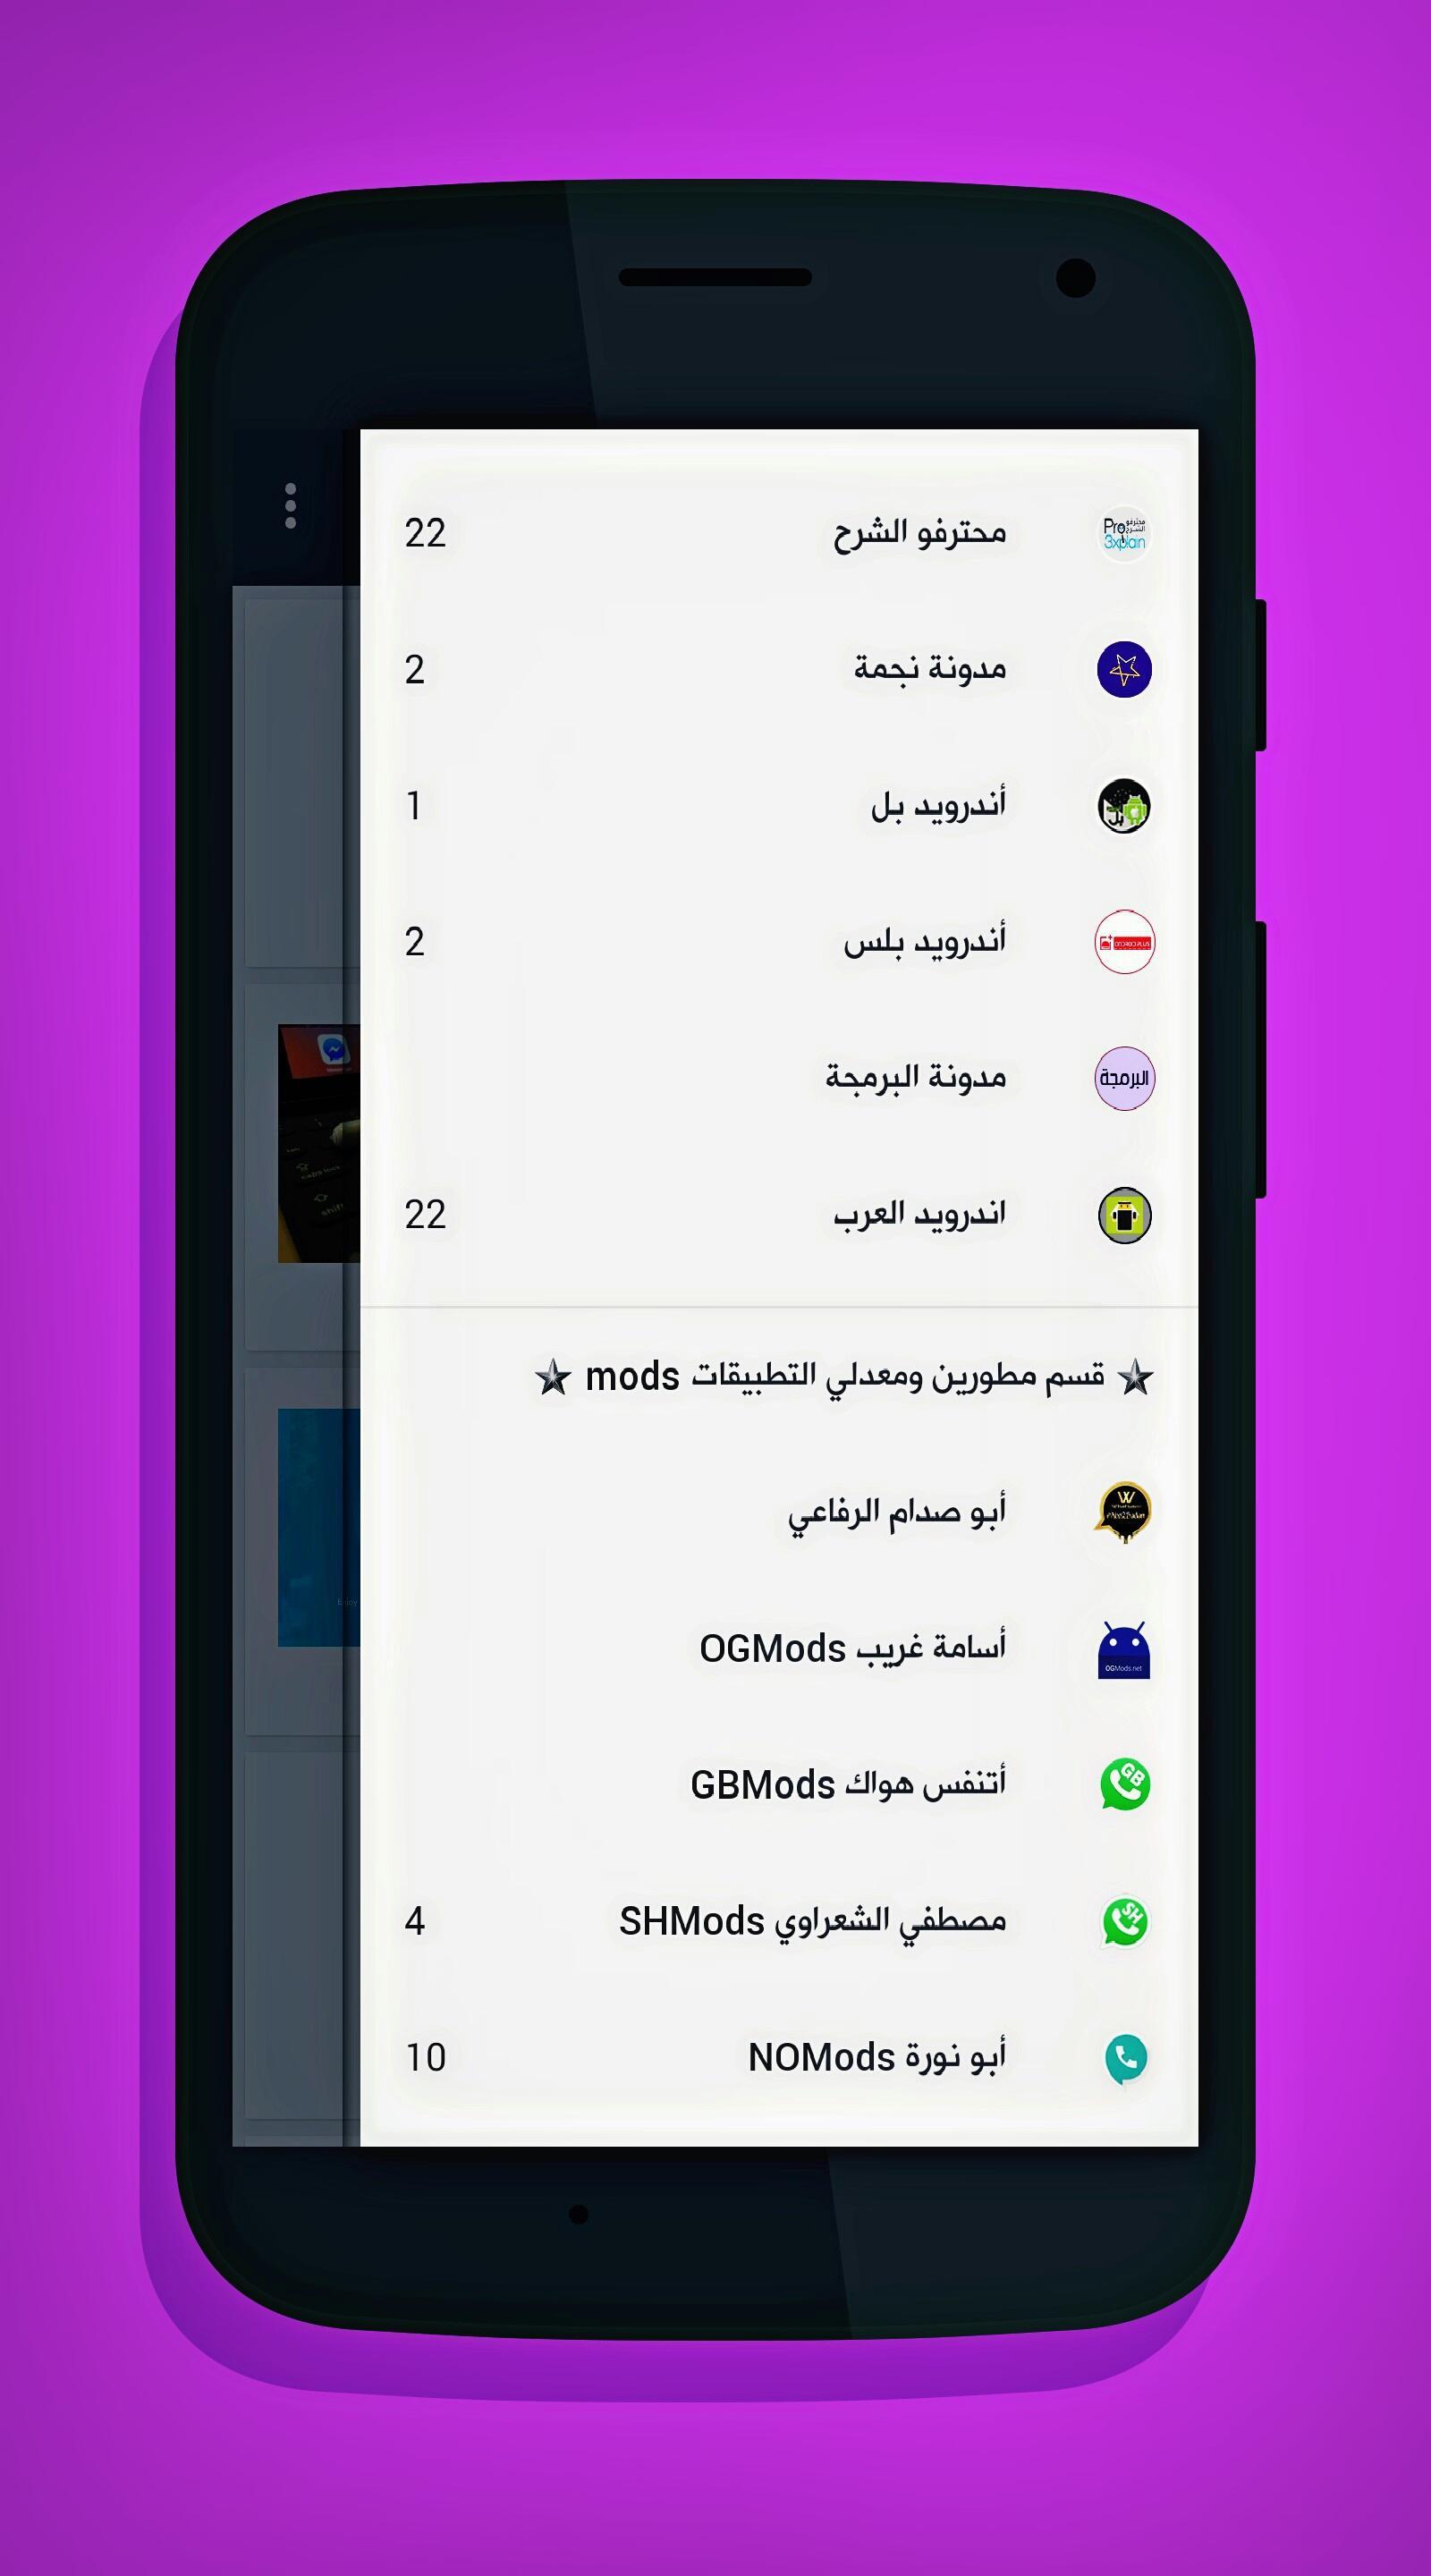 Ø§Ù„Ù…ÙˆØ³ÙˆØ¹Ø© Ø§Ù„ØªÙ‚Ù†ÙŠØ© for Android - APK Download - 